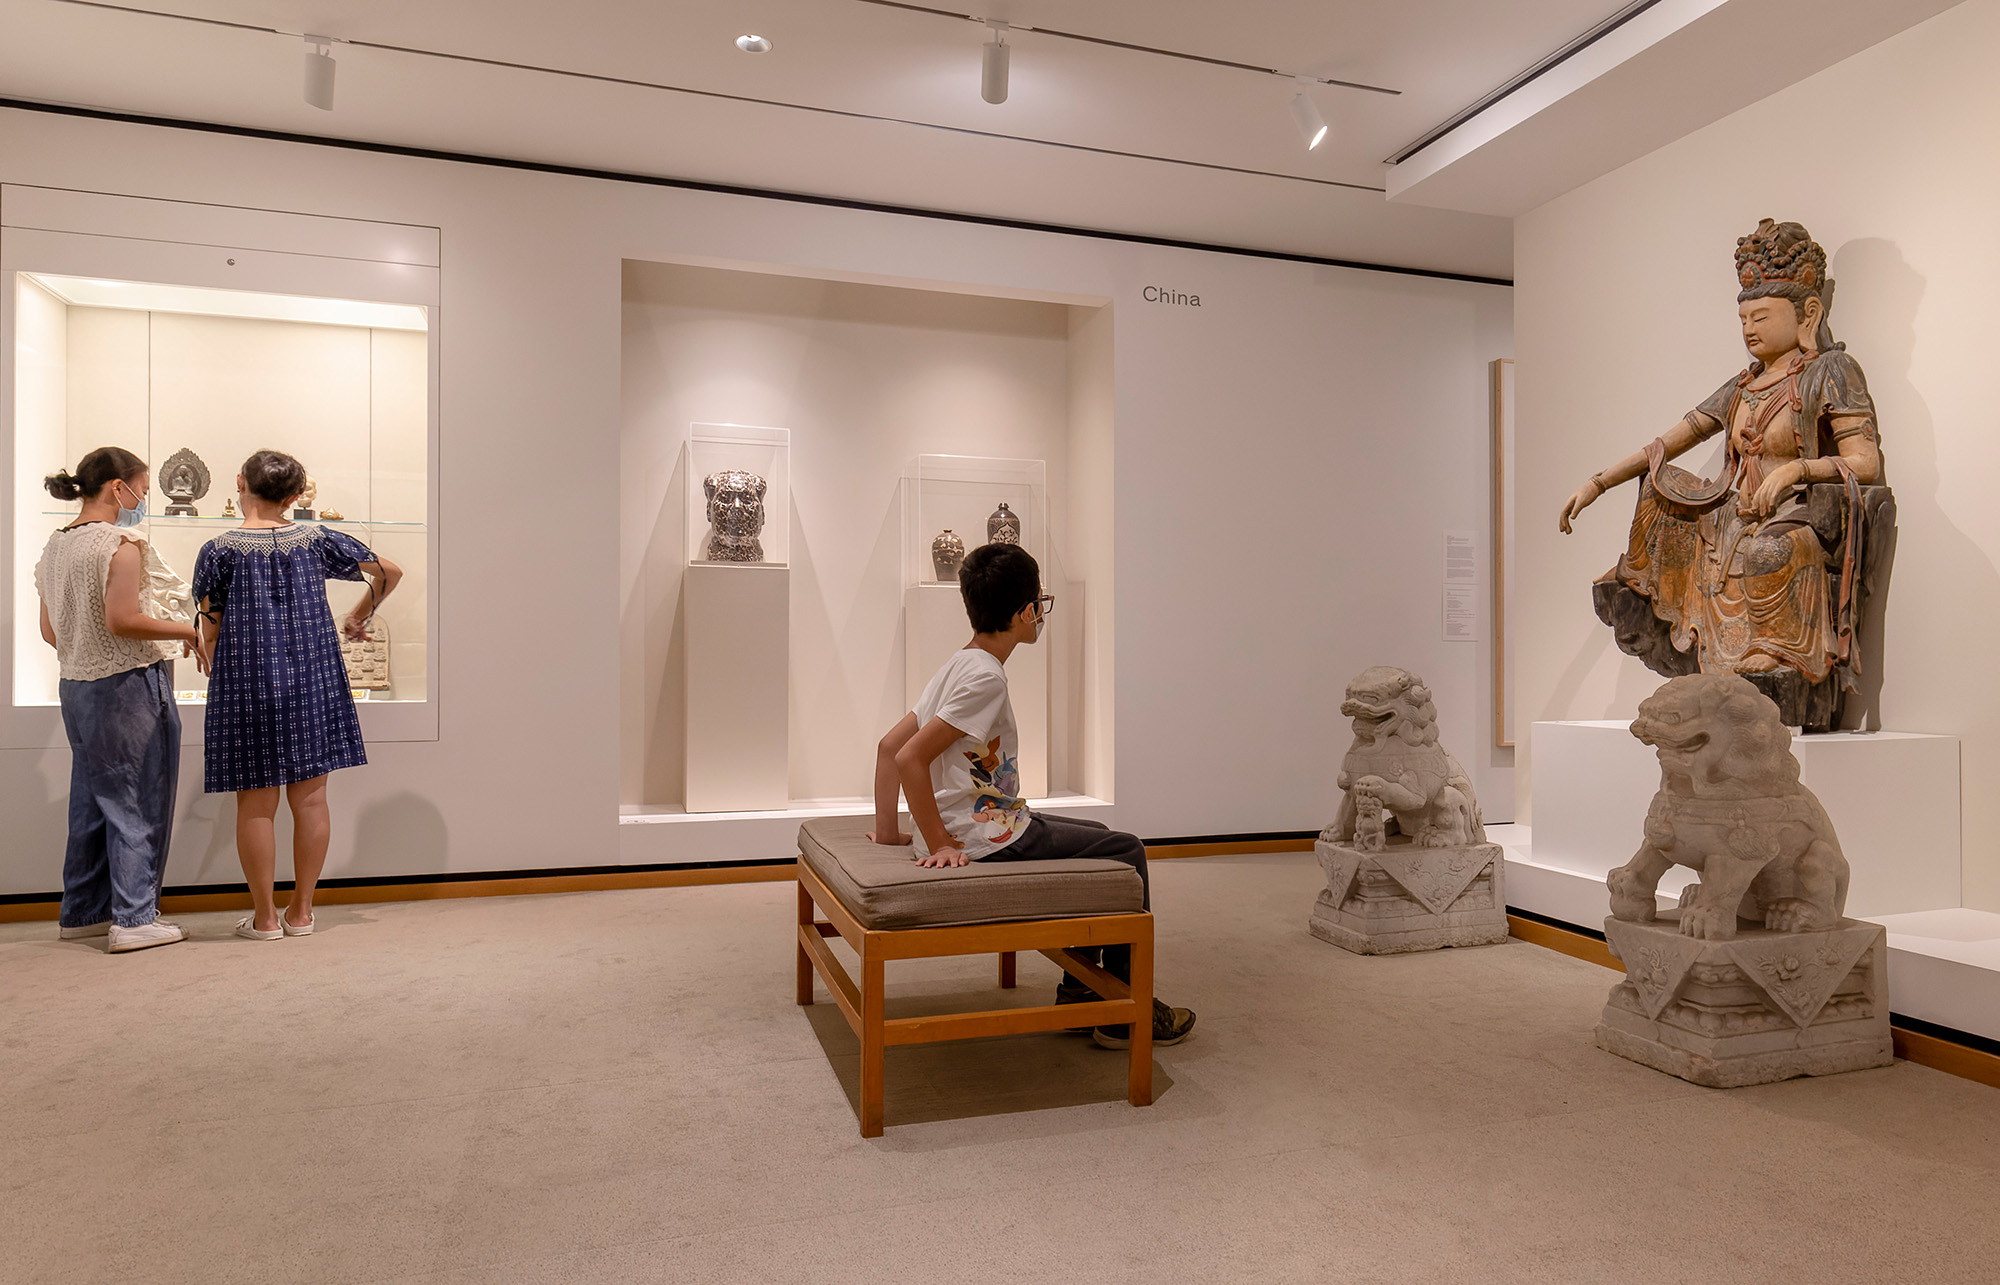 Two women and a boy visit a gallery of art from China including a large statue of a goddess flanked by stone lions